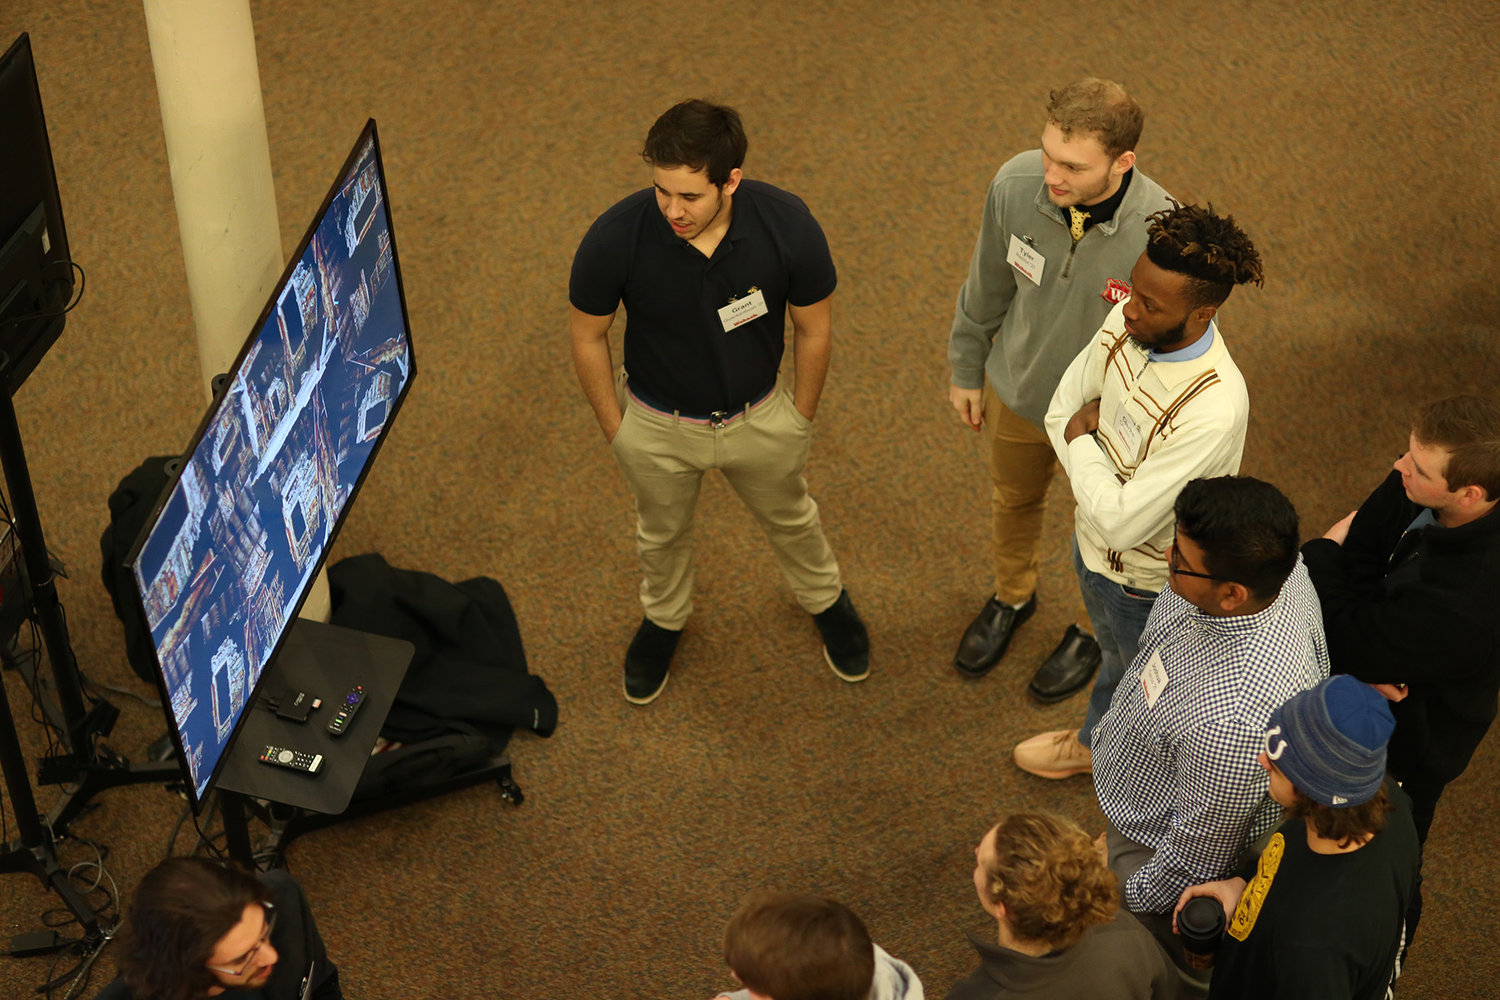 Wabash College students view a classmate’s presentation at the annual Celebration of Student Research, Scholarship, and Creative Work, which is annually held in January.